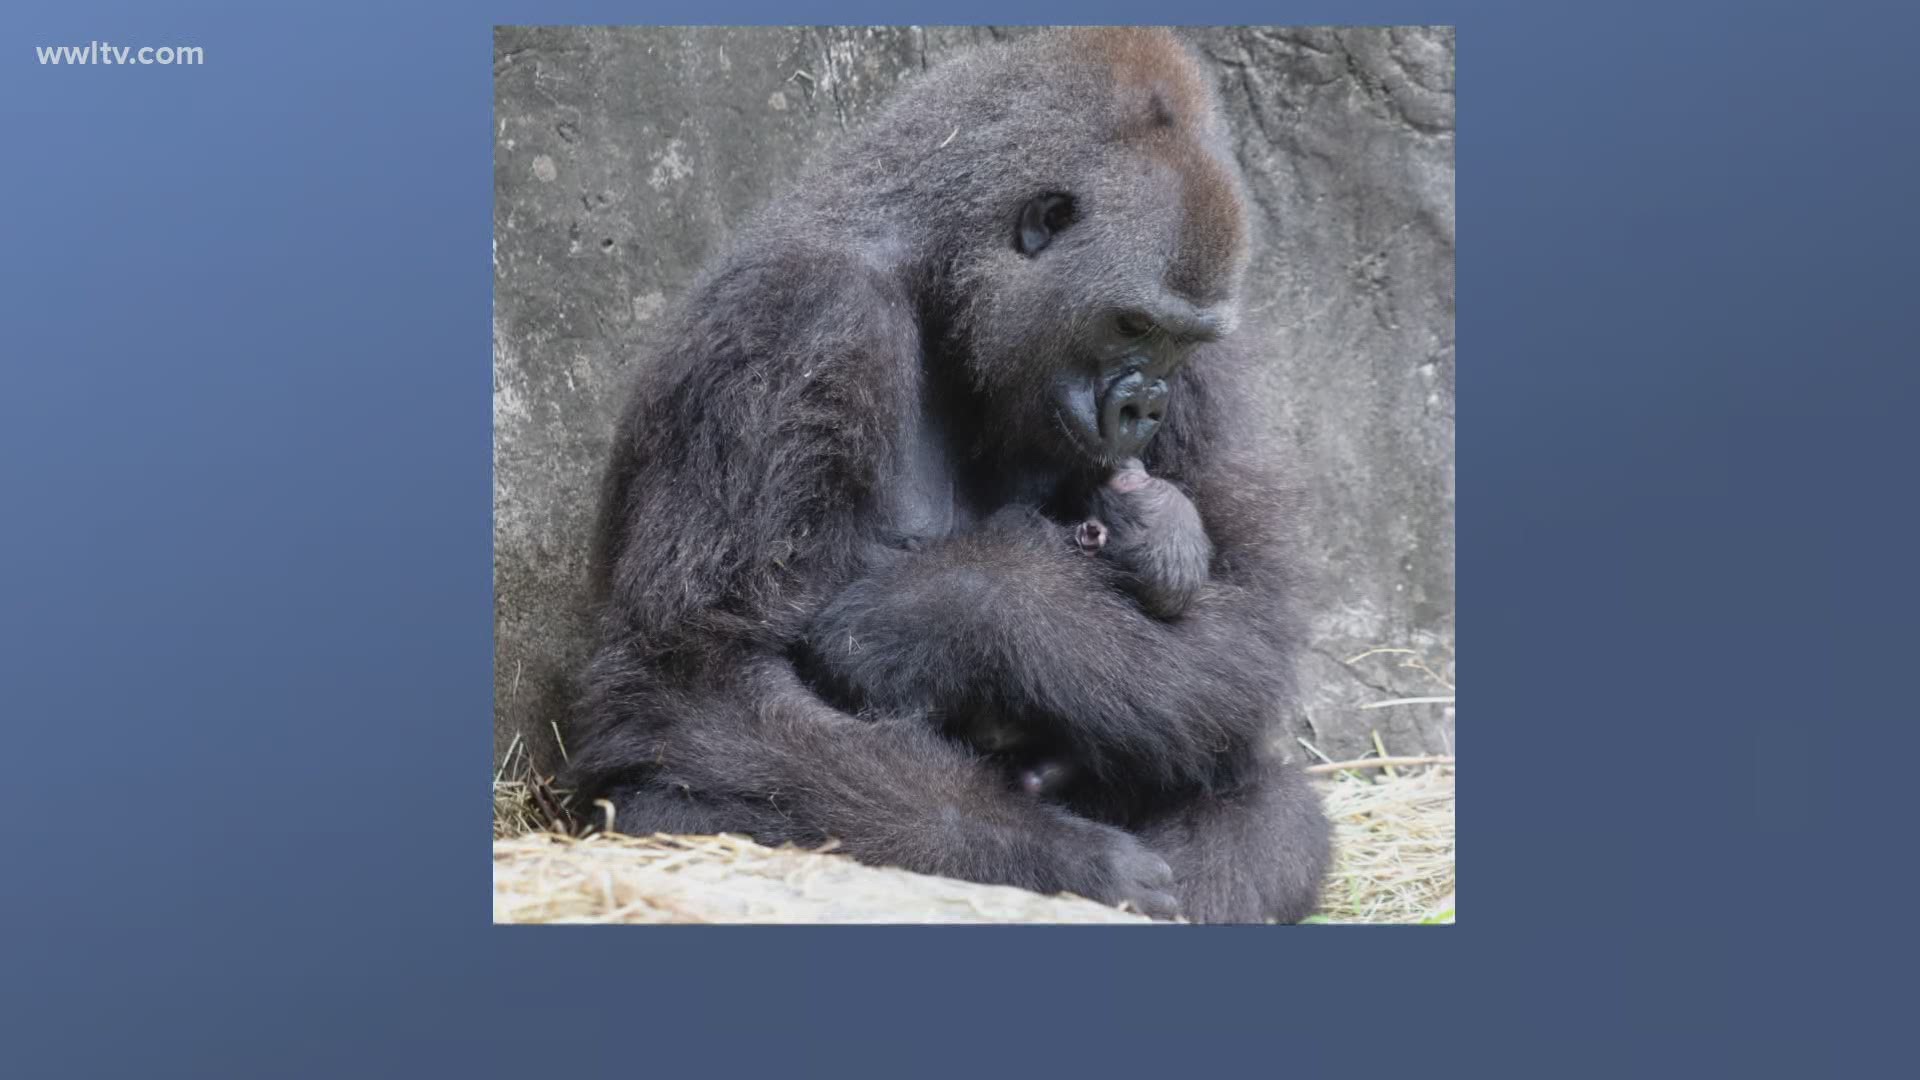 The six day old gorilla was the first gorilla birth for the zoo in 24 years.